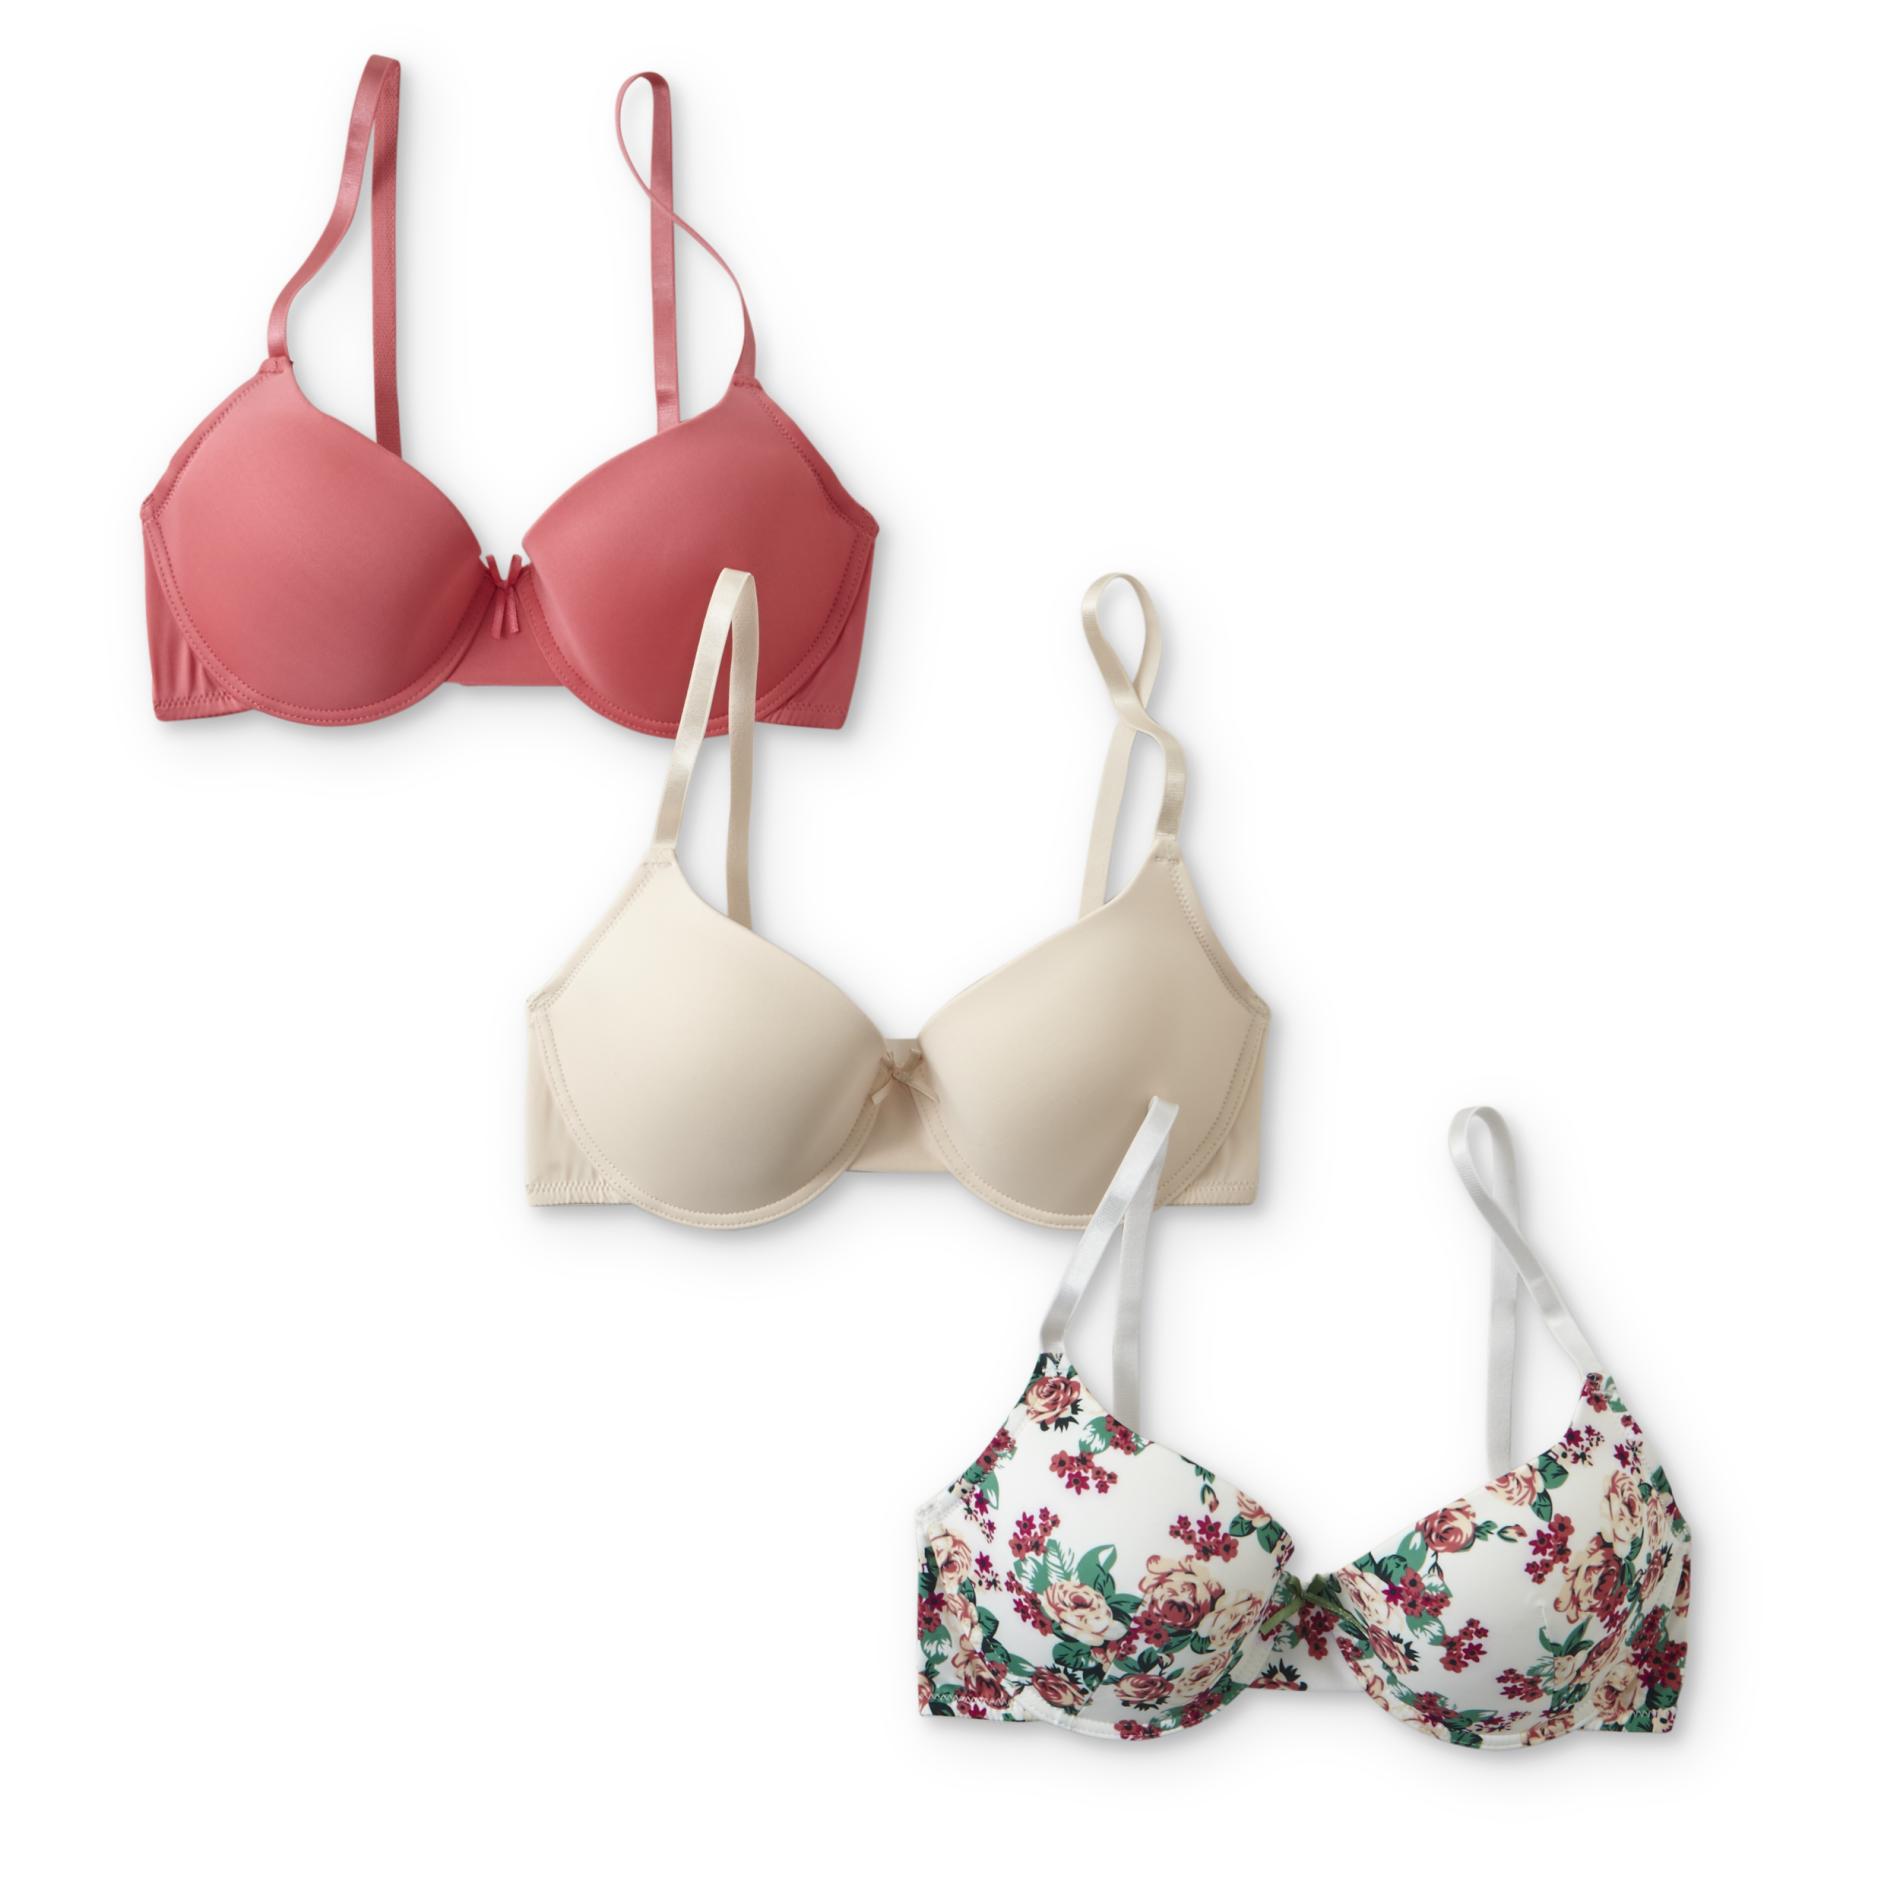 Simply Styled Women's 3-Pack T-Shirt Bras - Solid & Floral